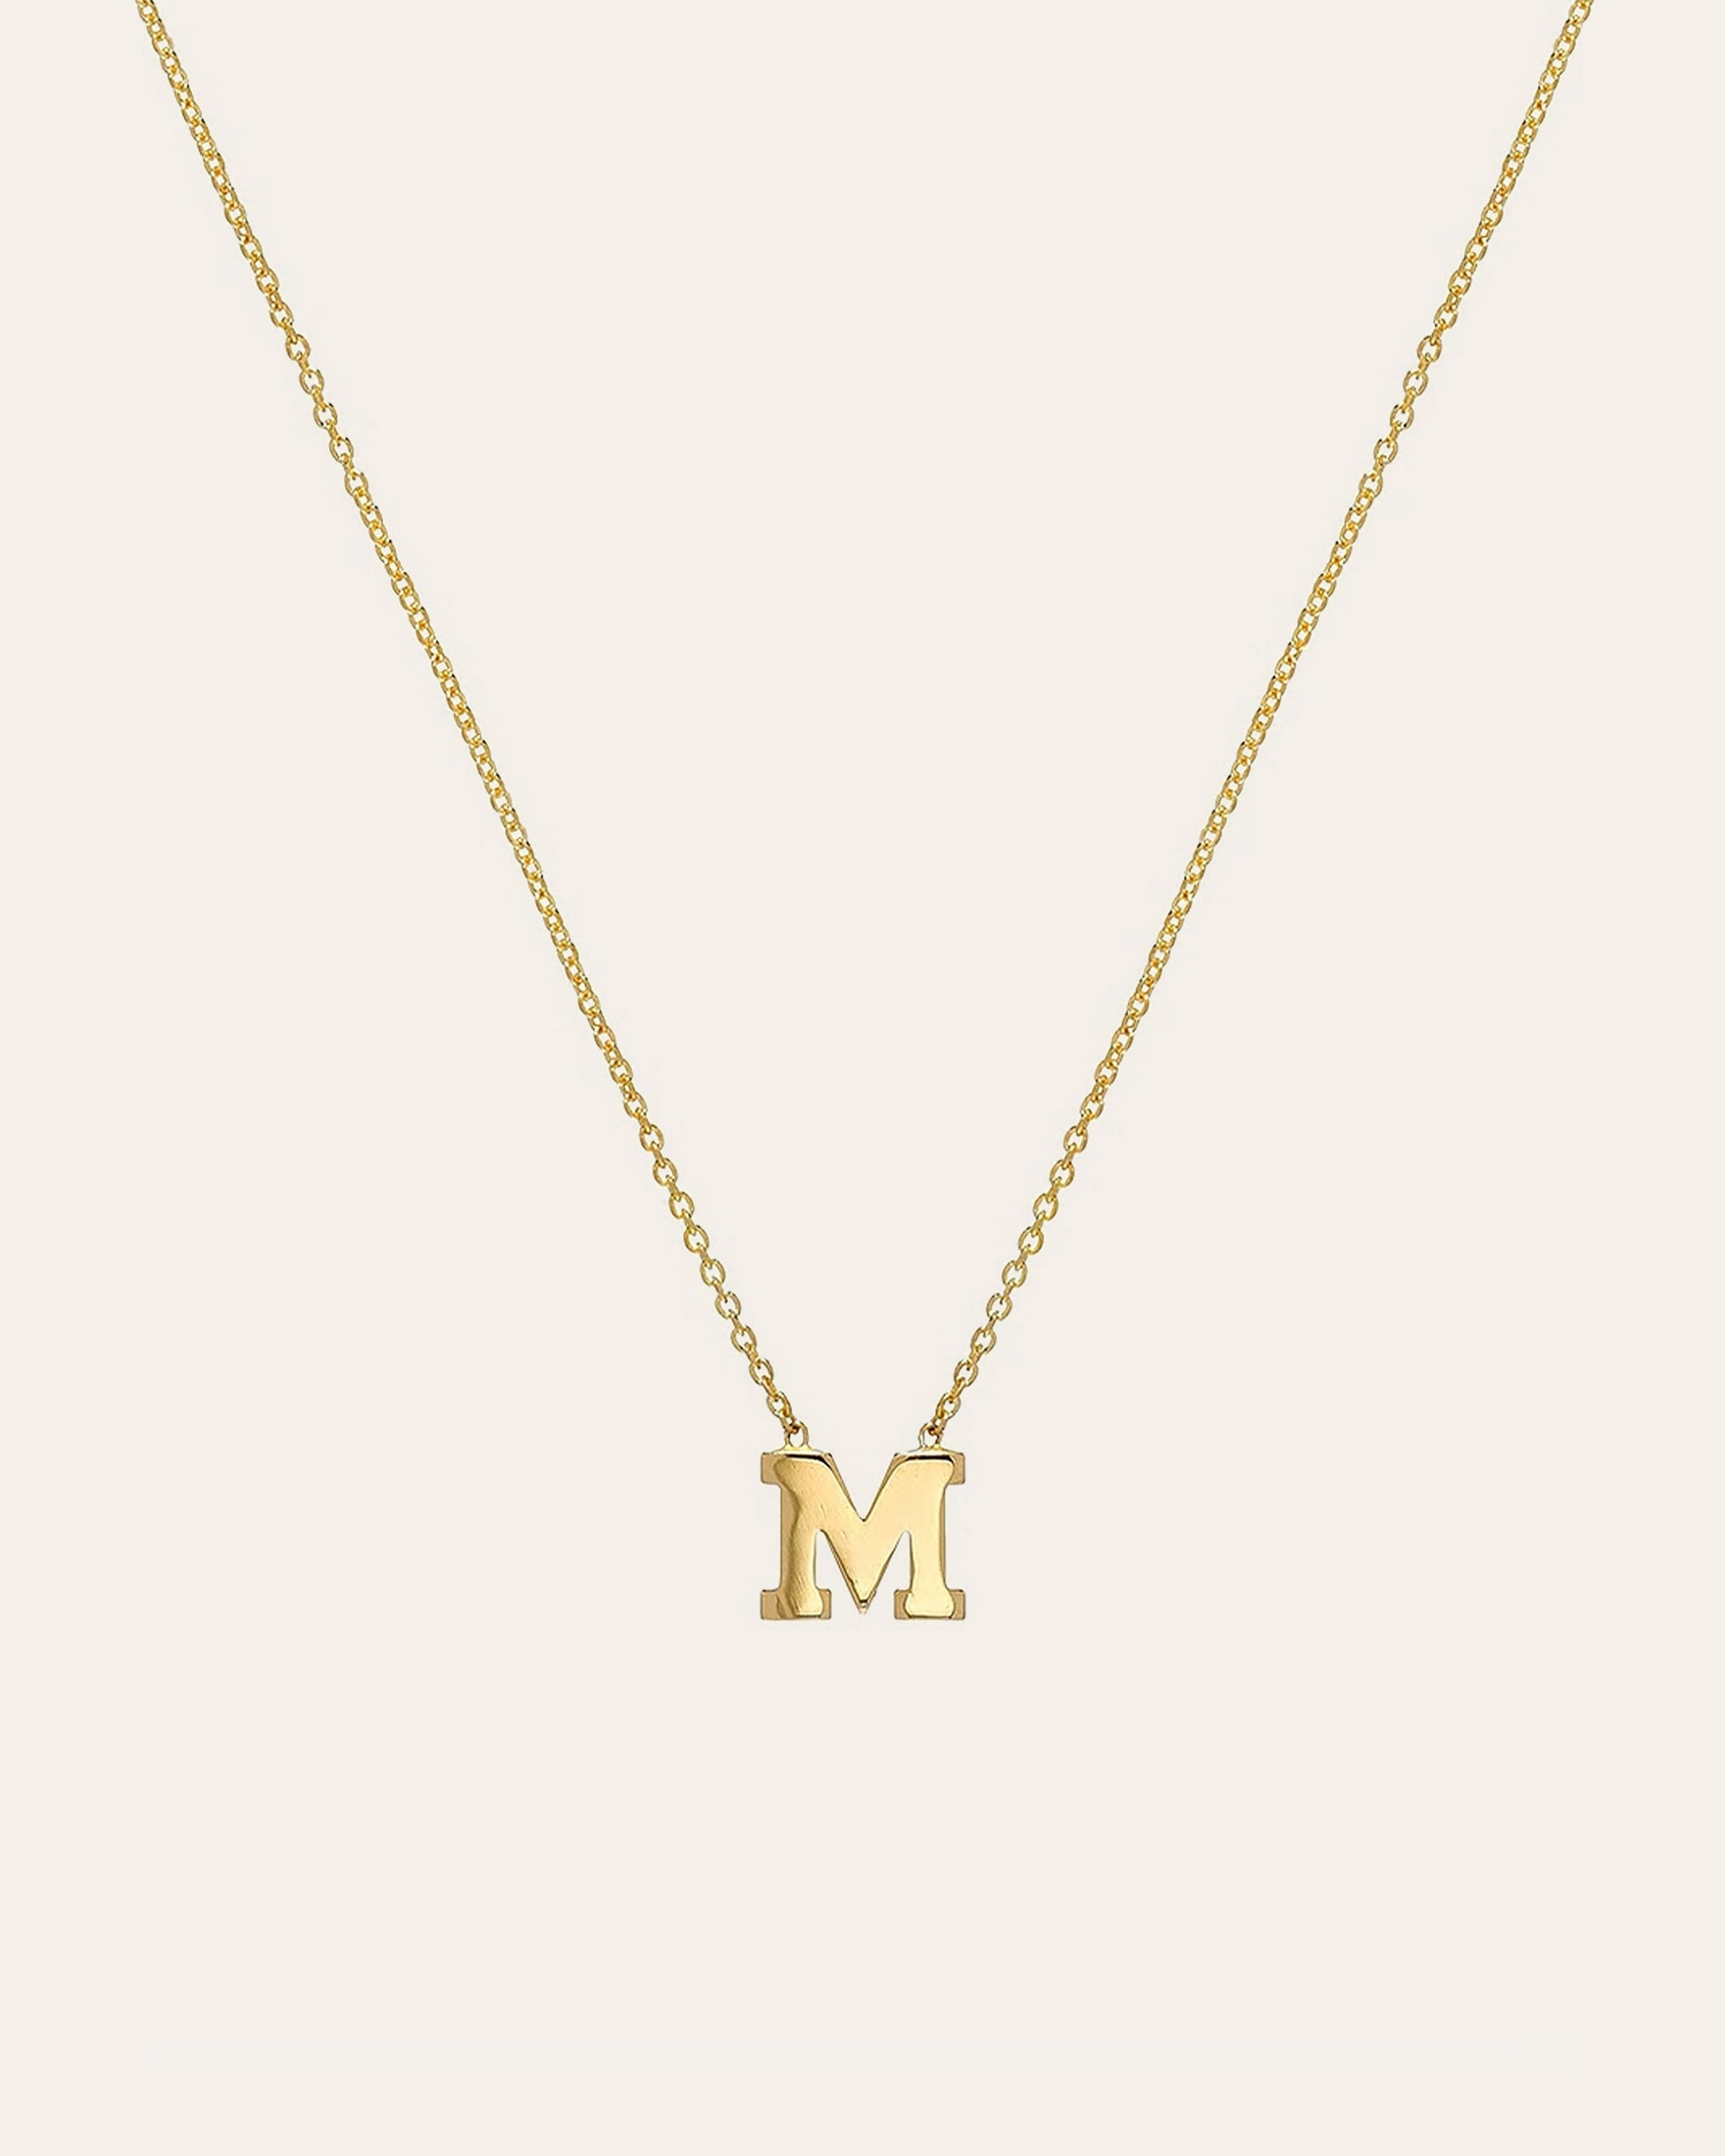 Necklaces and Chains | GOLD PLATED JEWELRY | GOLD UNIVERSE LETTER NECKLACE-LETTER  L - rommanelusa